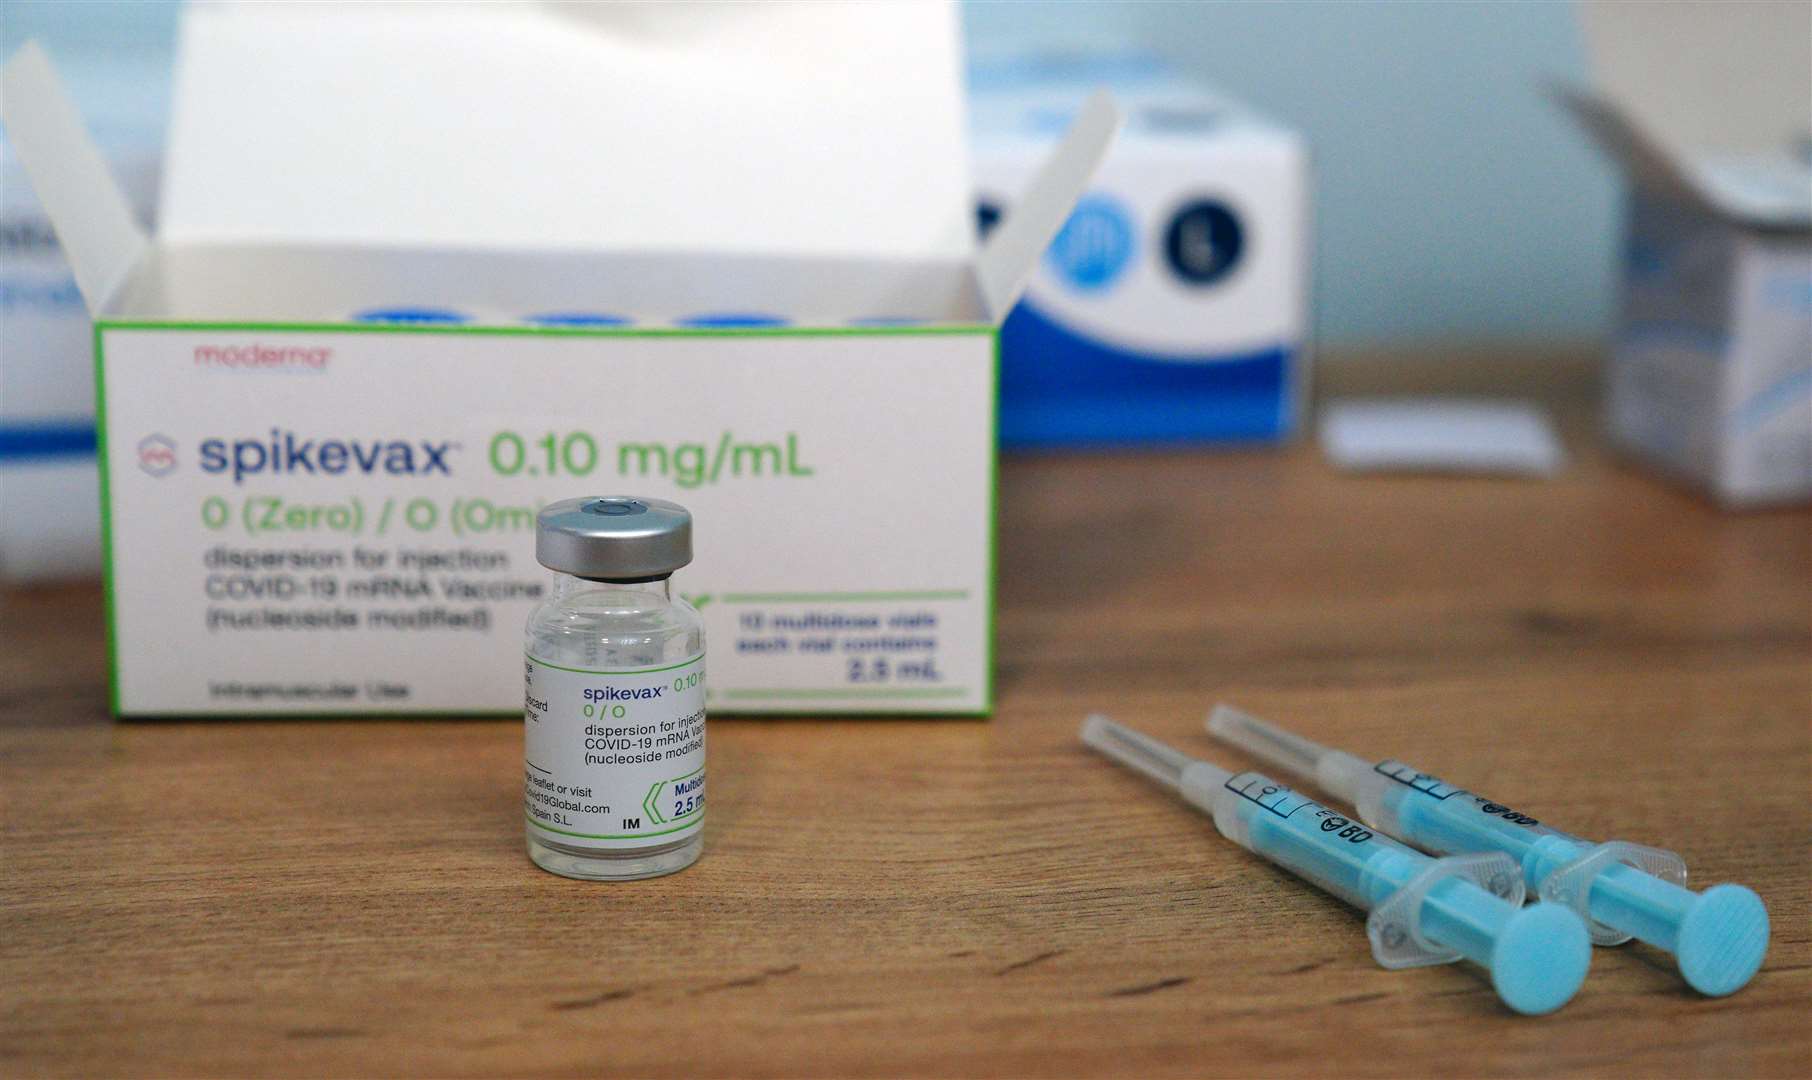 Moderna’s Spikevax vaccine was the third jab to be approved for use in the UK in January 2021 (Peter Byrne/PA)